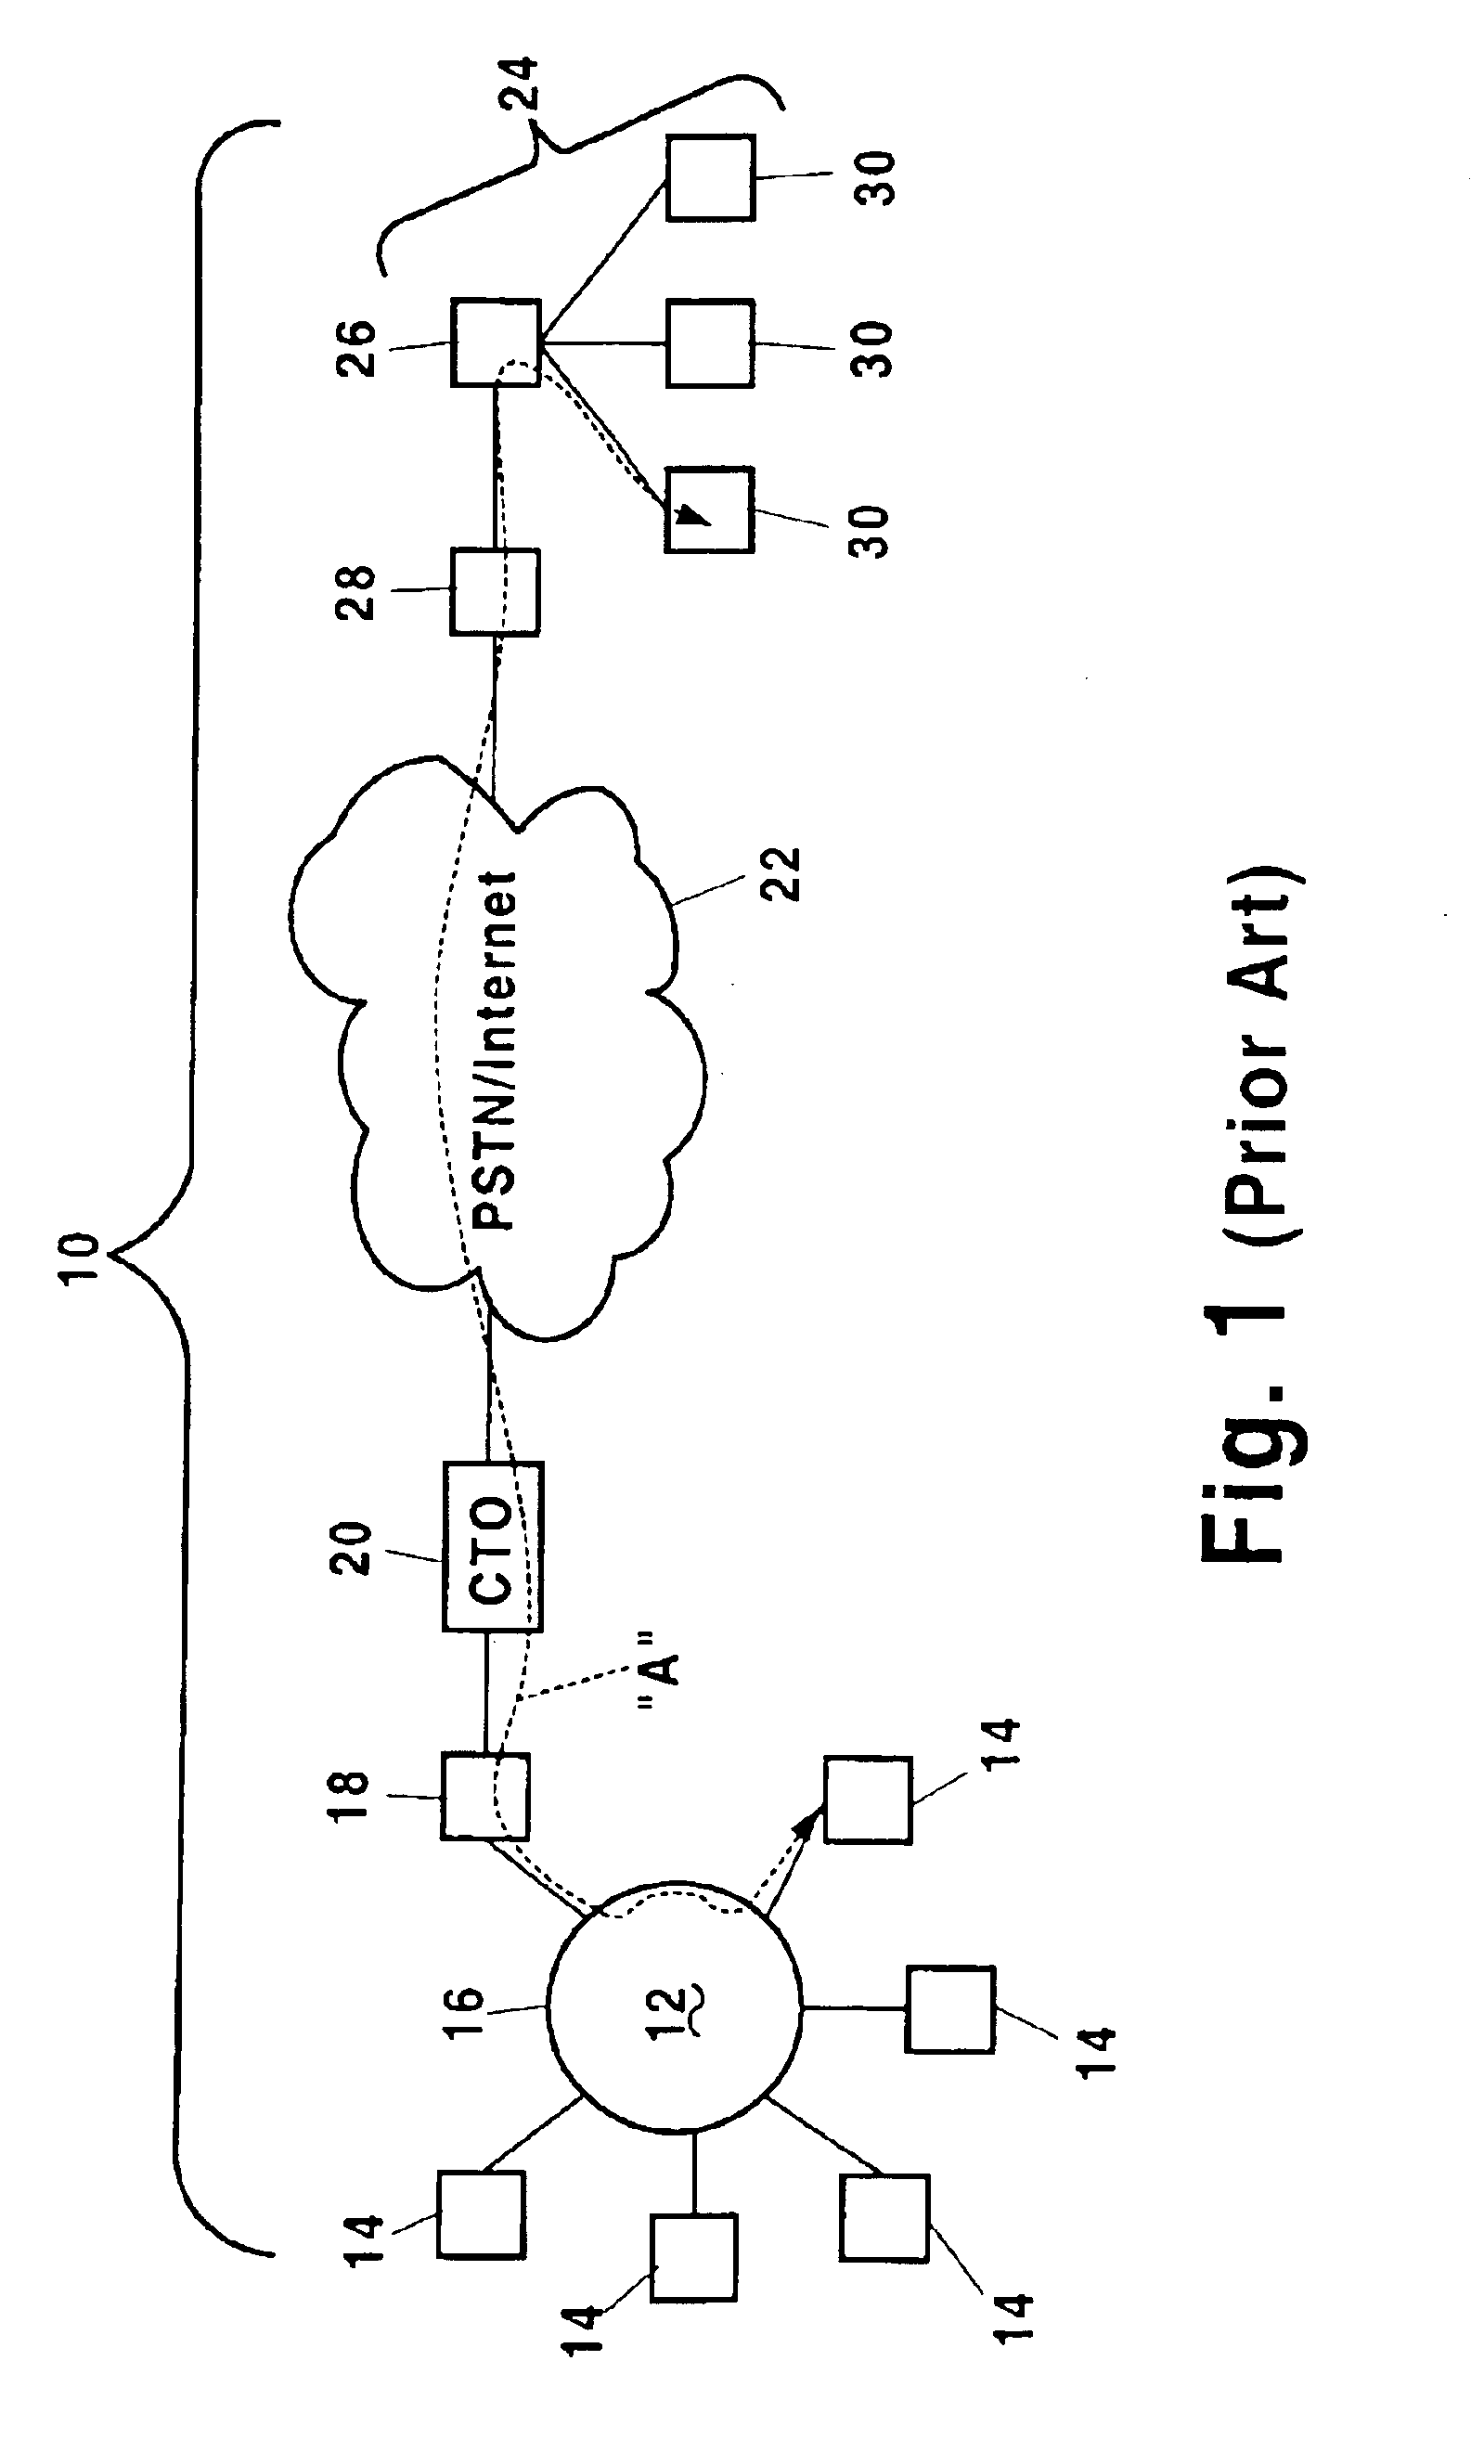 Integrated method for performing scheduling, routing and access control in a computer network